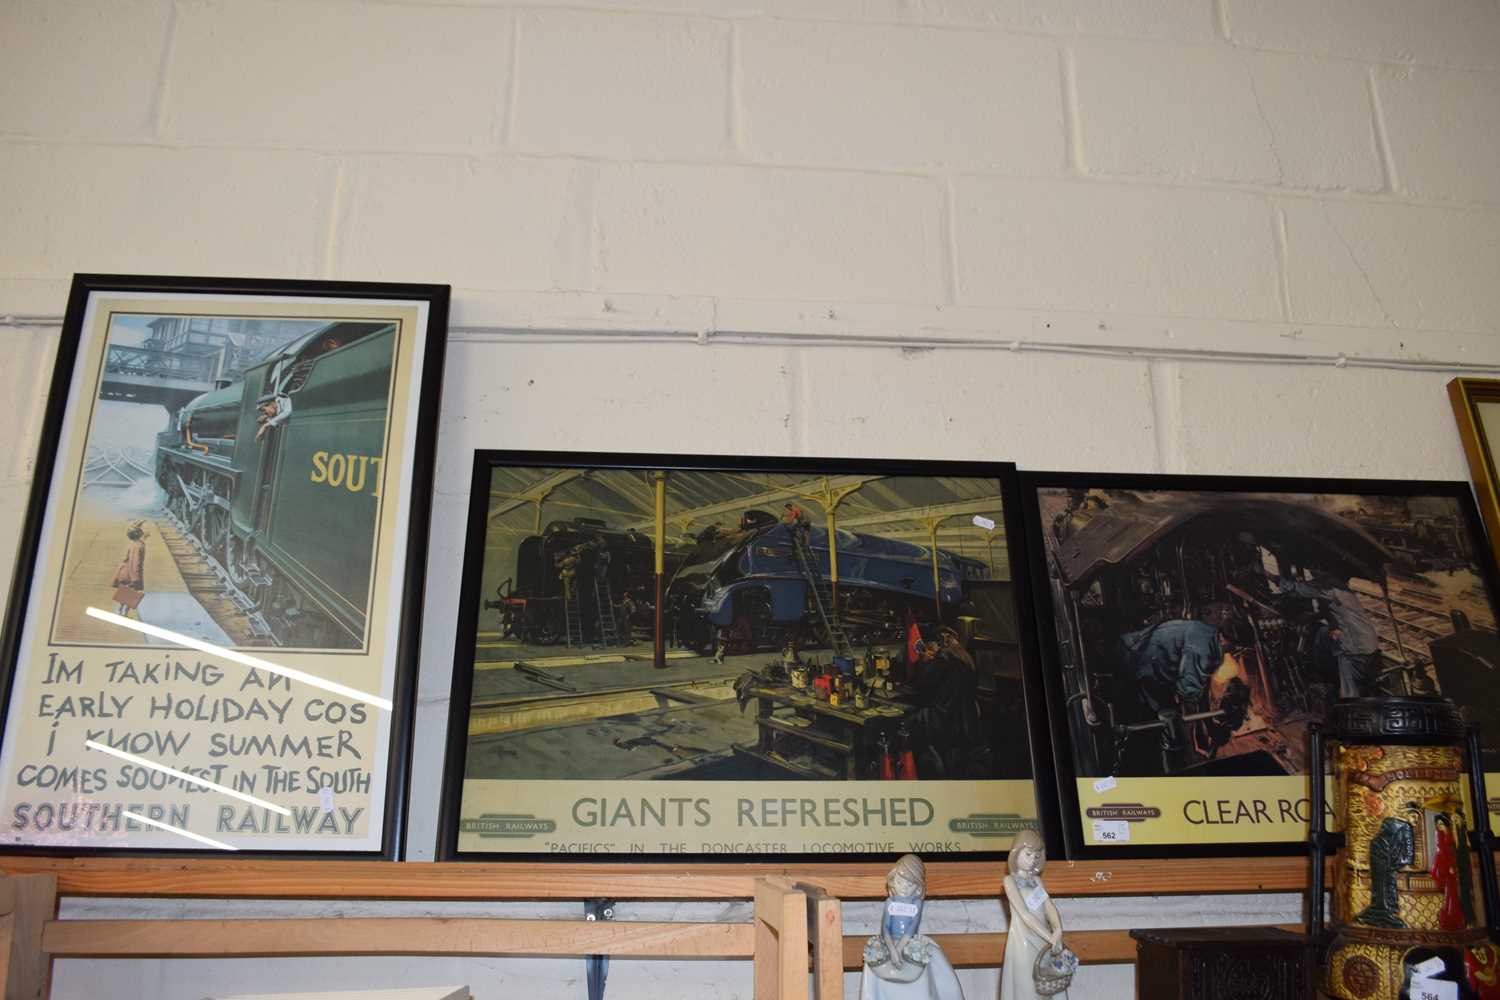 Two reproduction British Railway posters, 'Giants Refreshed' and 'Clear Road Ahead' together with